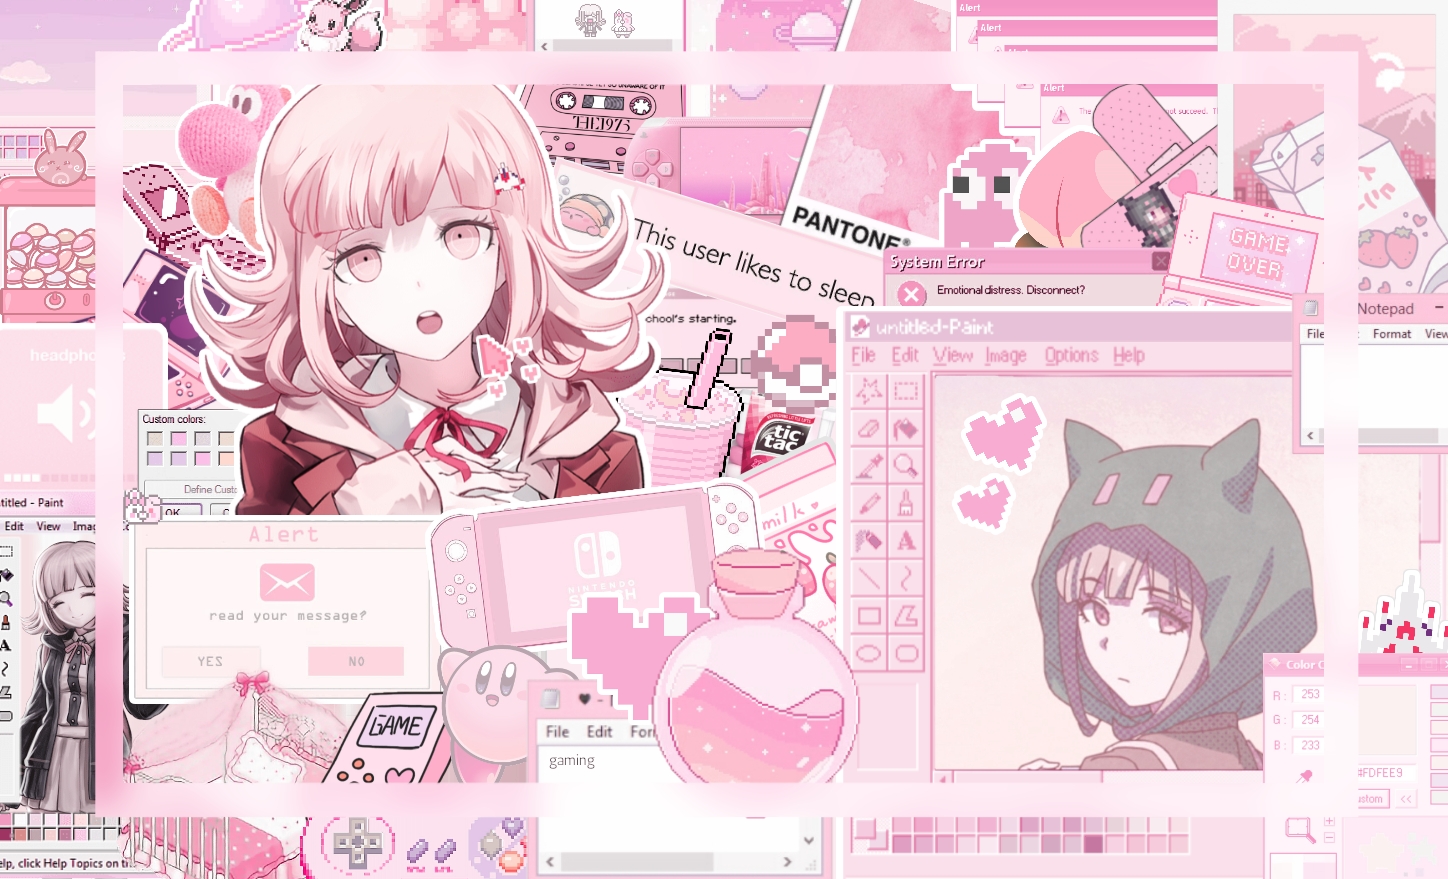 chiaki nanami computer wallpaper edit! first edit i've made like this one, honestly only made it to see if i could pull it off: danganronpa